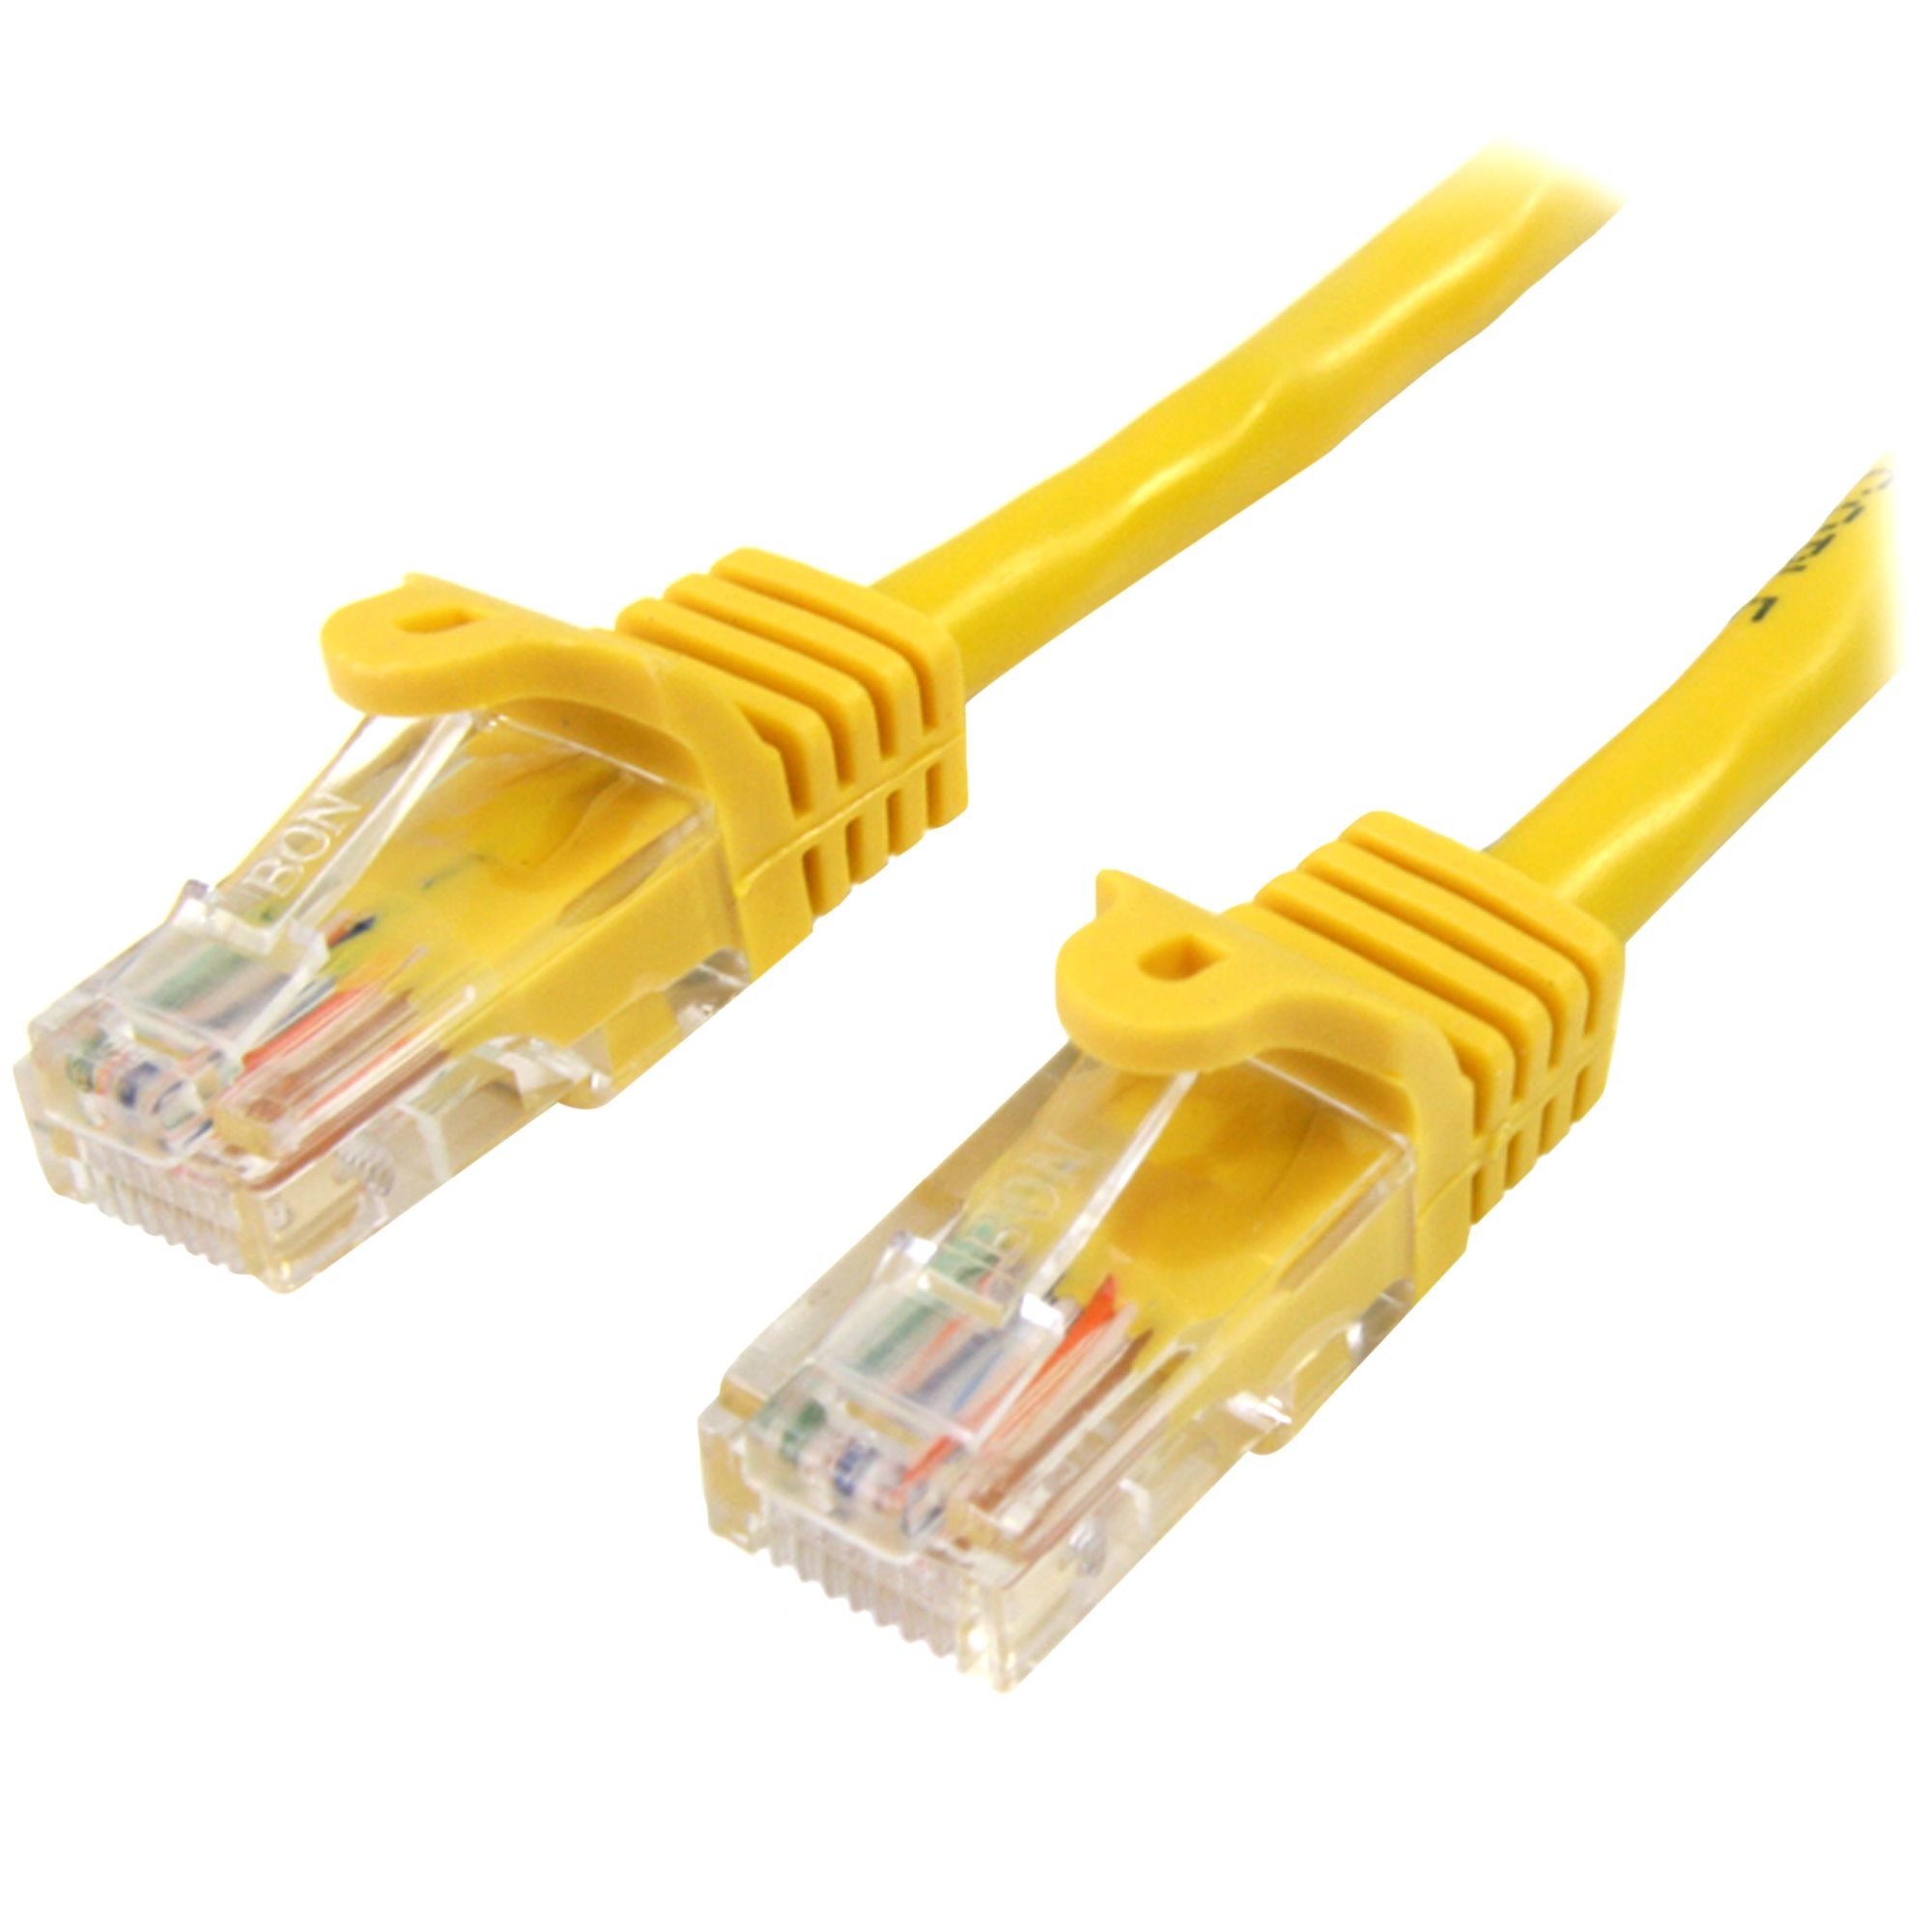 5m Yellow Snagless Cat5e Patch Cable thumbnail